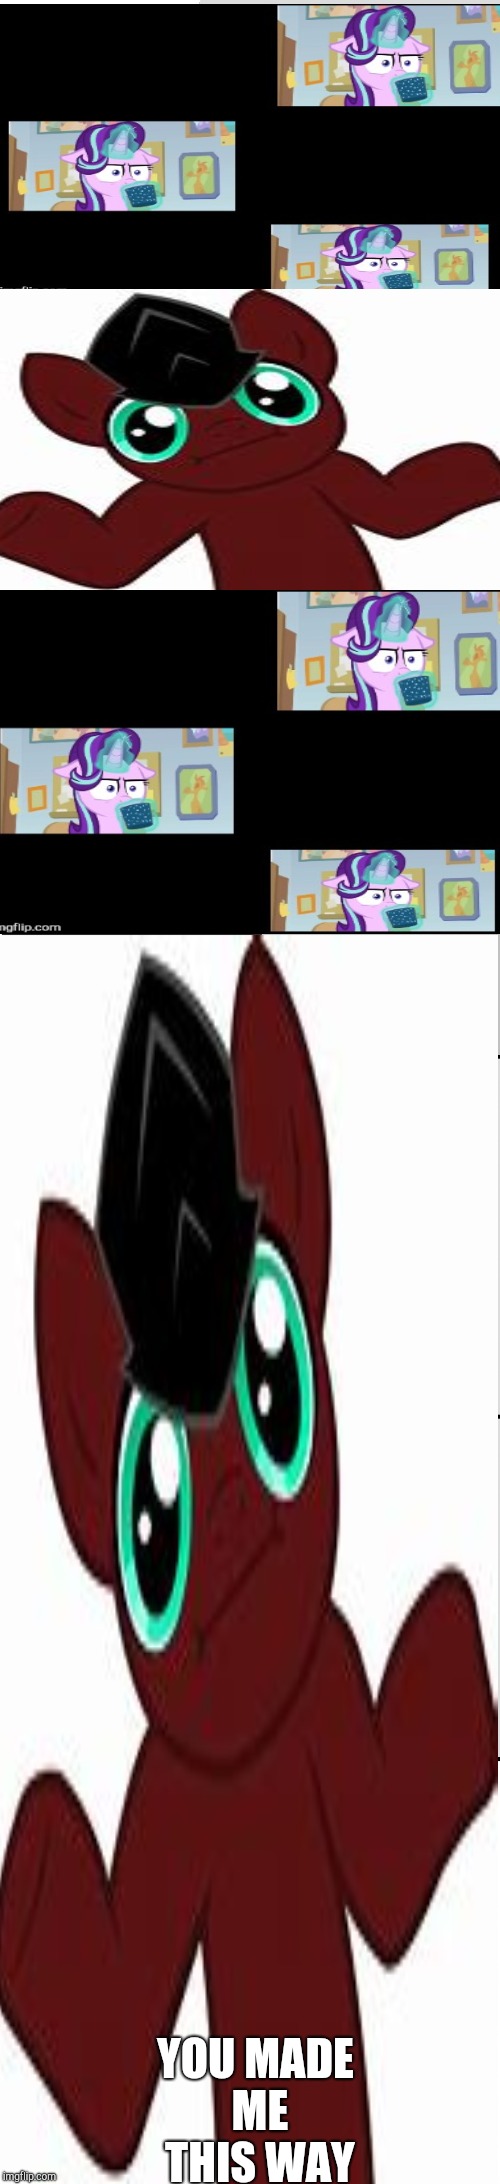 Cocoa-lost Glimmer vs. Why Does It Staff Brony Blank Meme Template